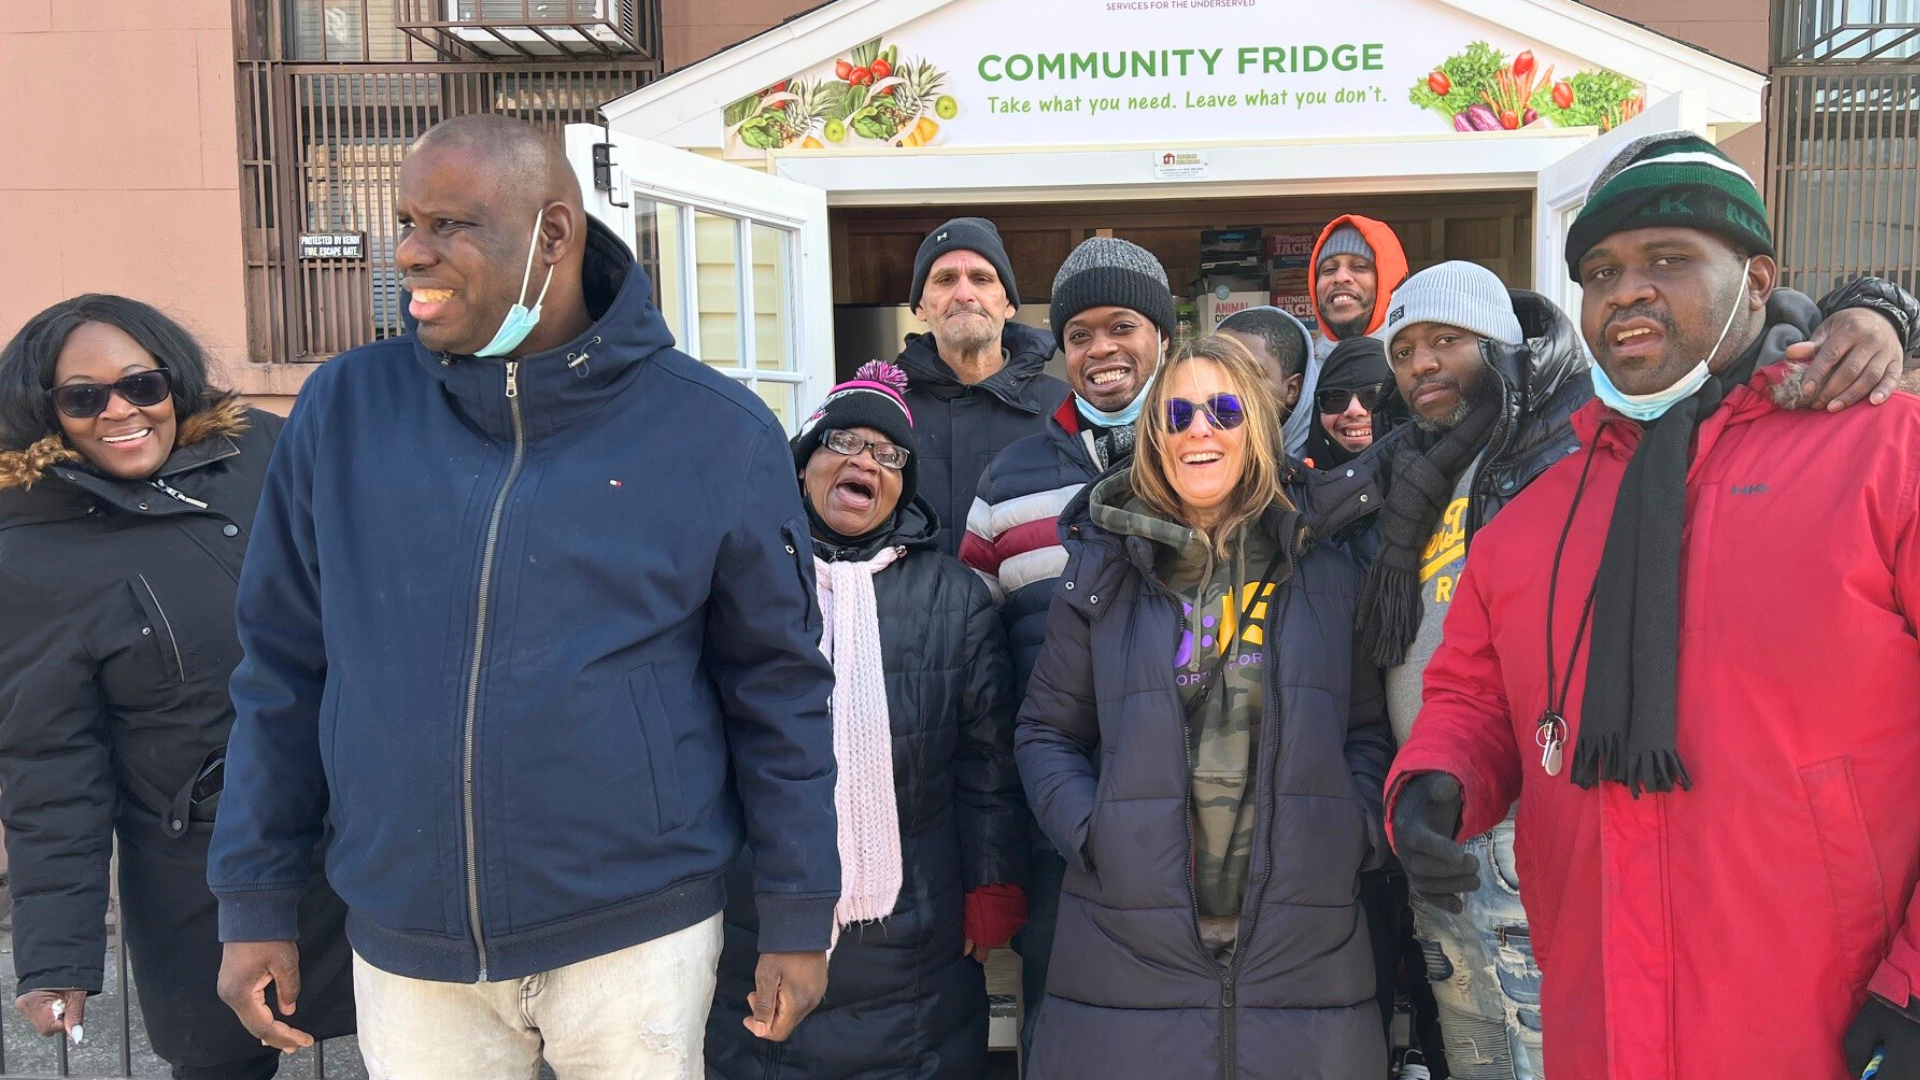 S:US and Sharing Excess Announce Partnership to Expand Community Fridge Program in the Bronx